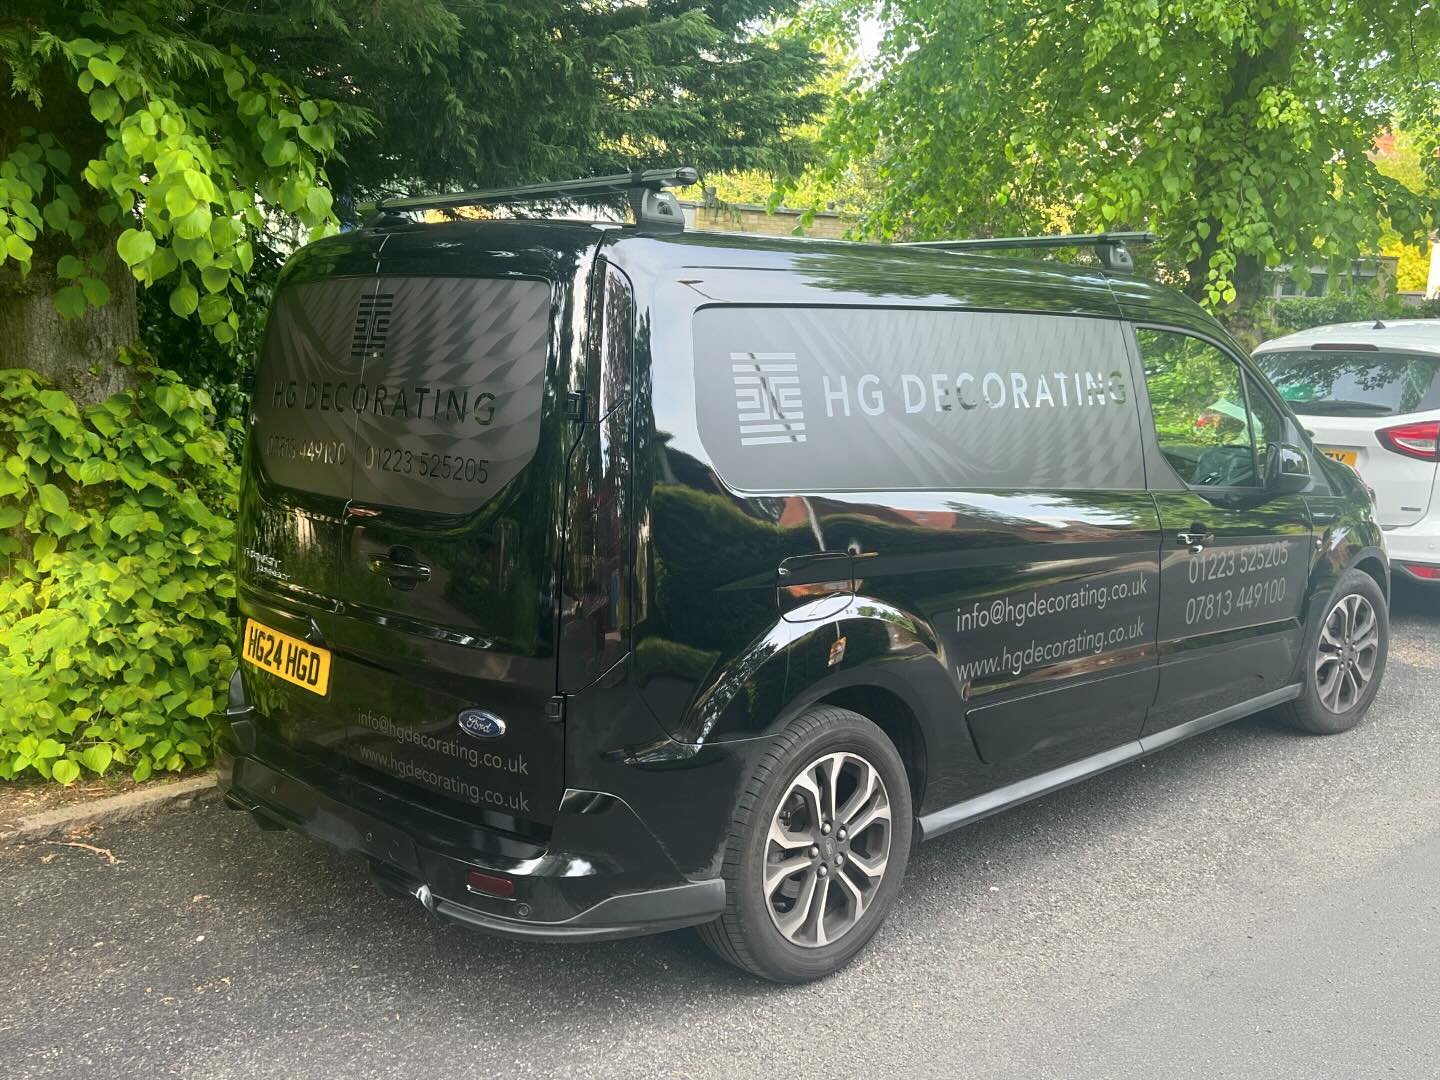 So happy with this&hellip;As per usual Eddie from @create_signs sorting the newest addition to HG. 

#graphicdesign #van #painting #paintersofinstagram #cambridgedecorators#decoratorsofinstagram  #Cambridge #decor #decorate #decorating #blackedout #b